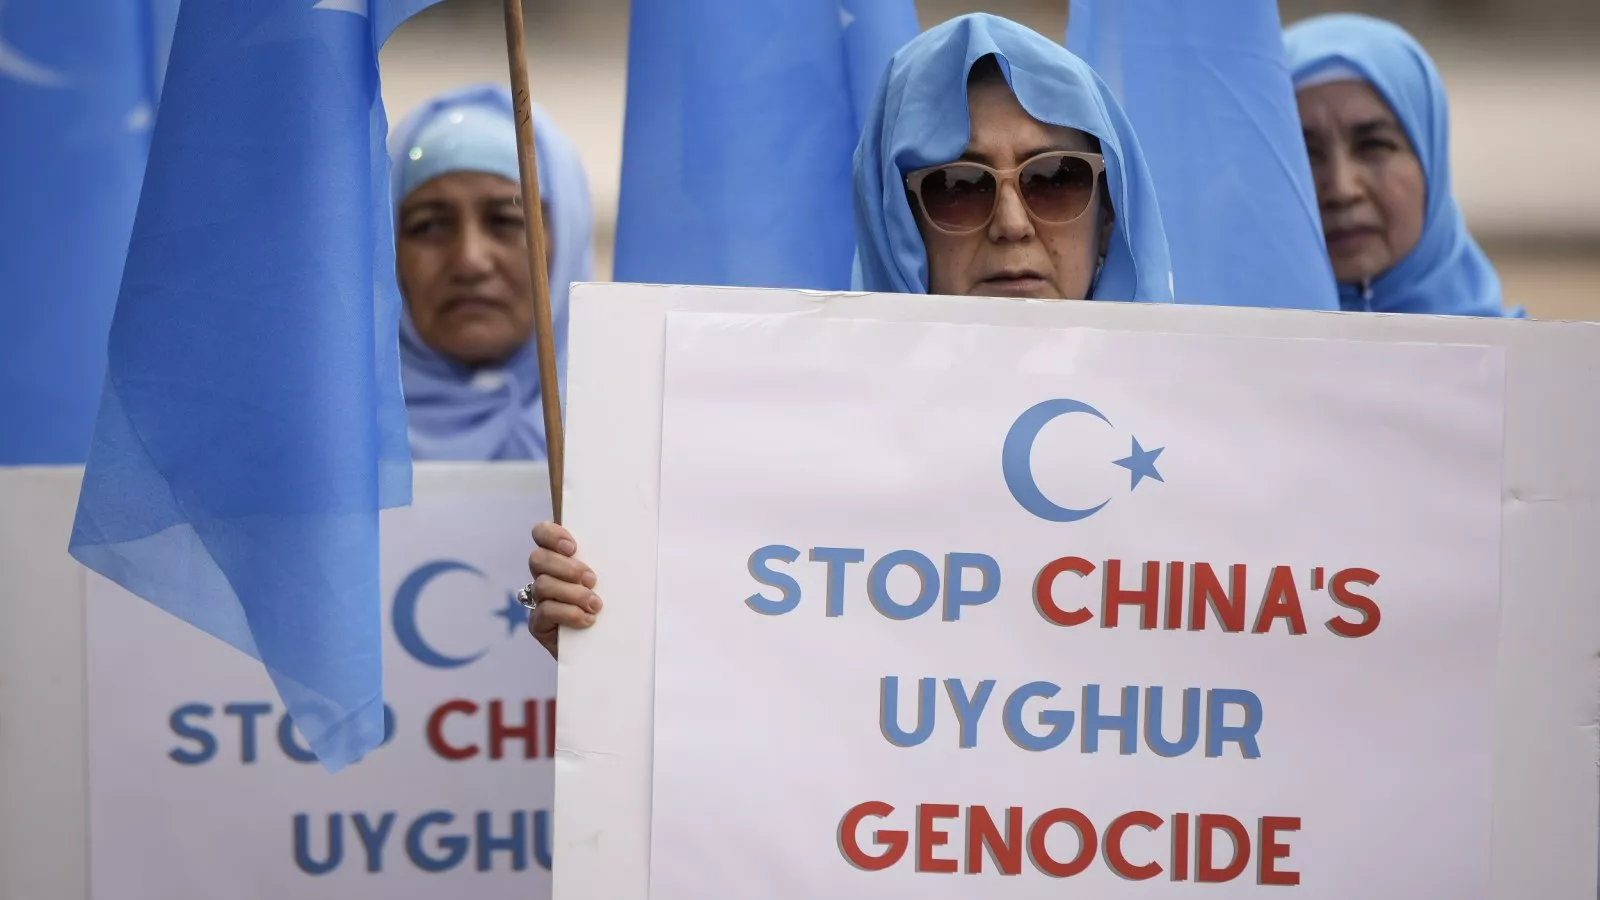 UN report points to modern slavery practice in China's Xinjiang